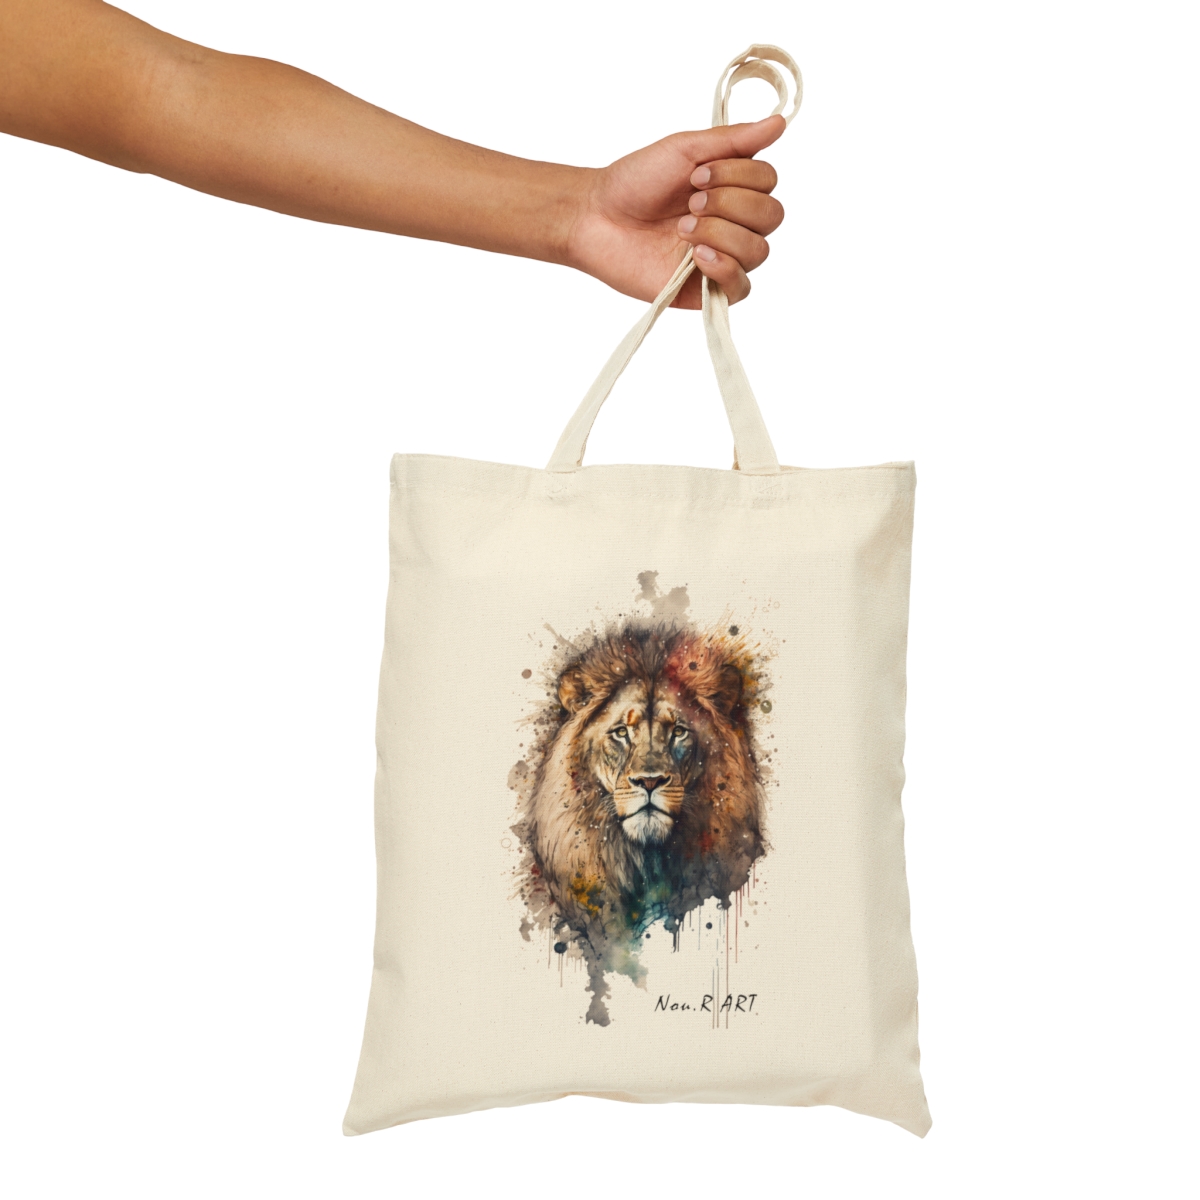 LION FACE LEATHER BACKPACK – www.soosi.co.in